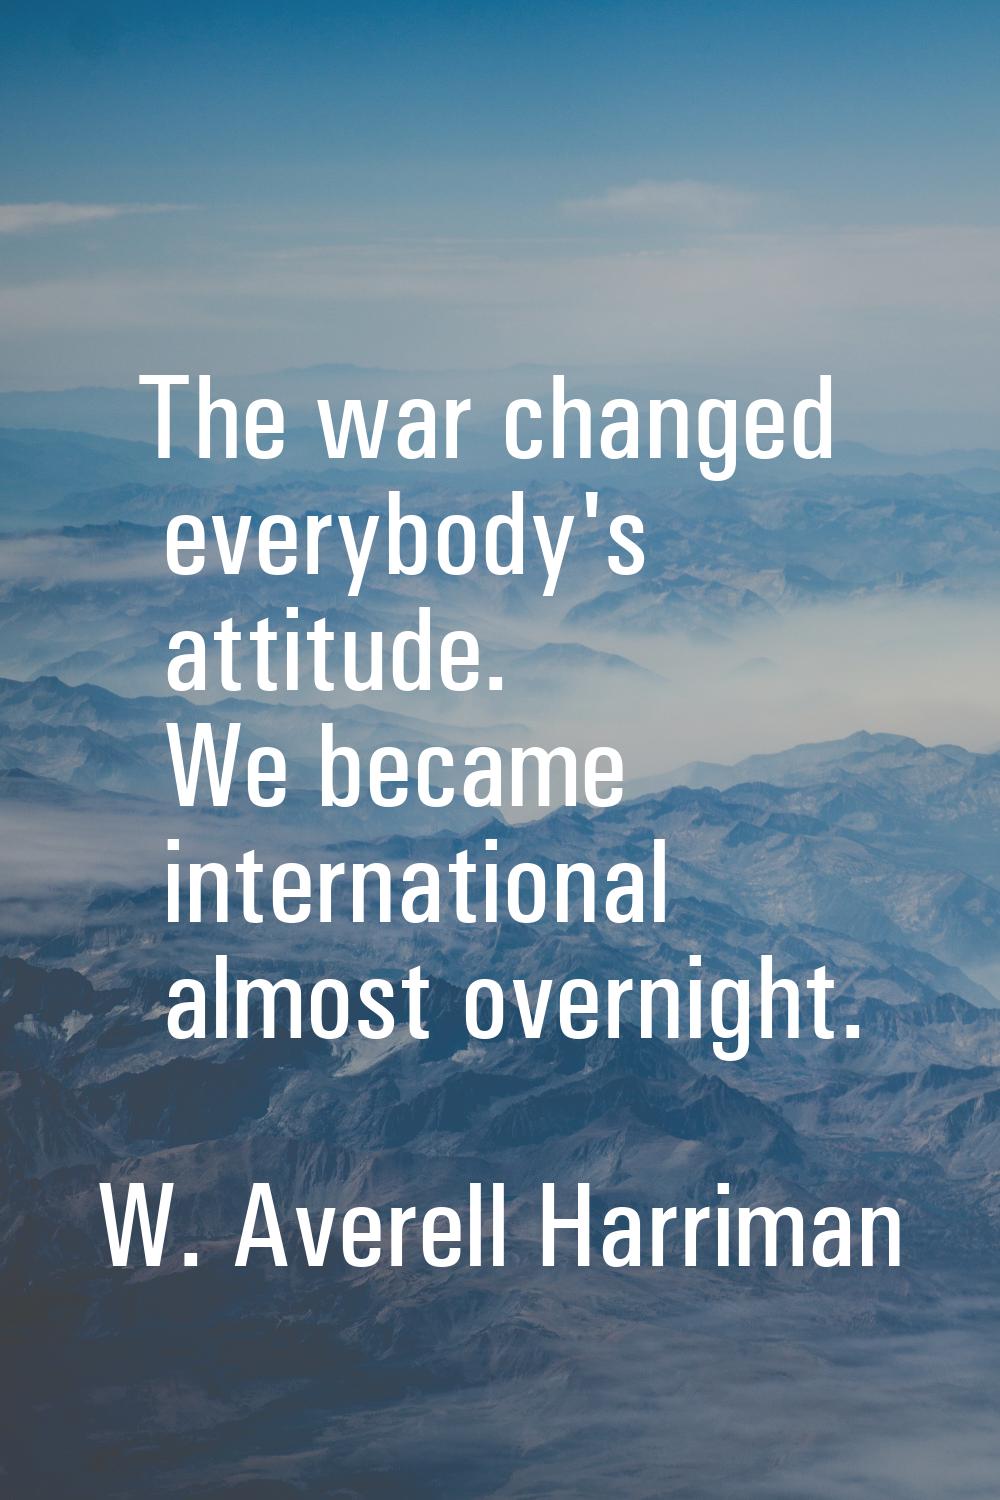 The war changed everybody's attitude. We became international almost overnight.